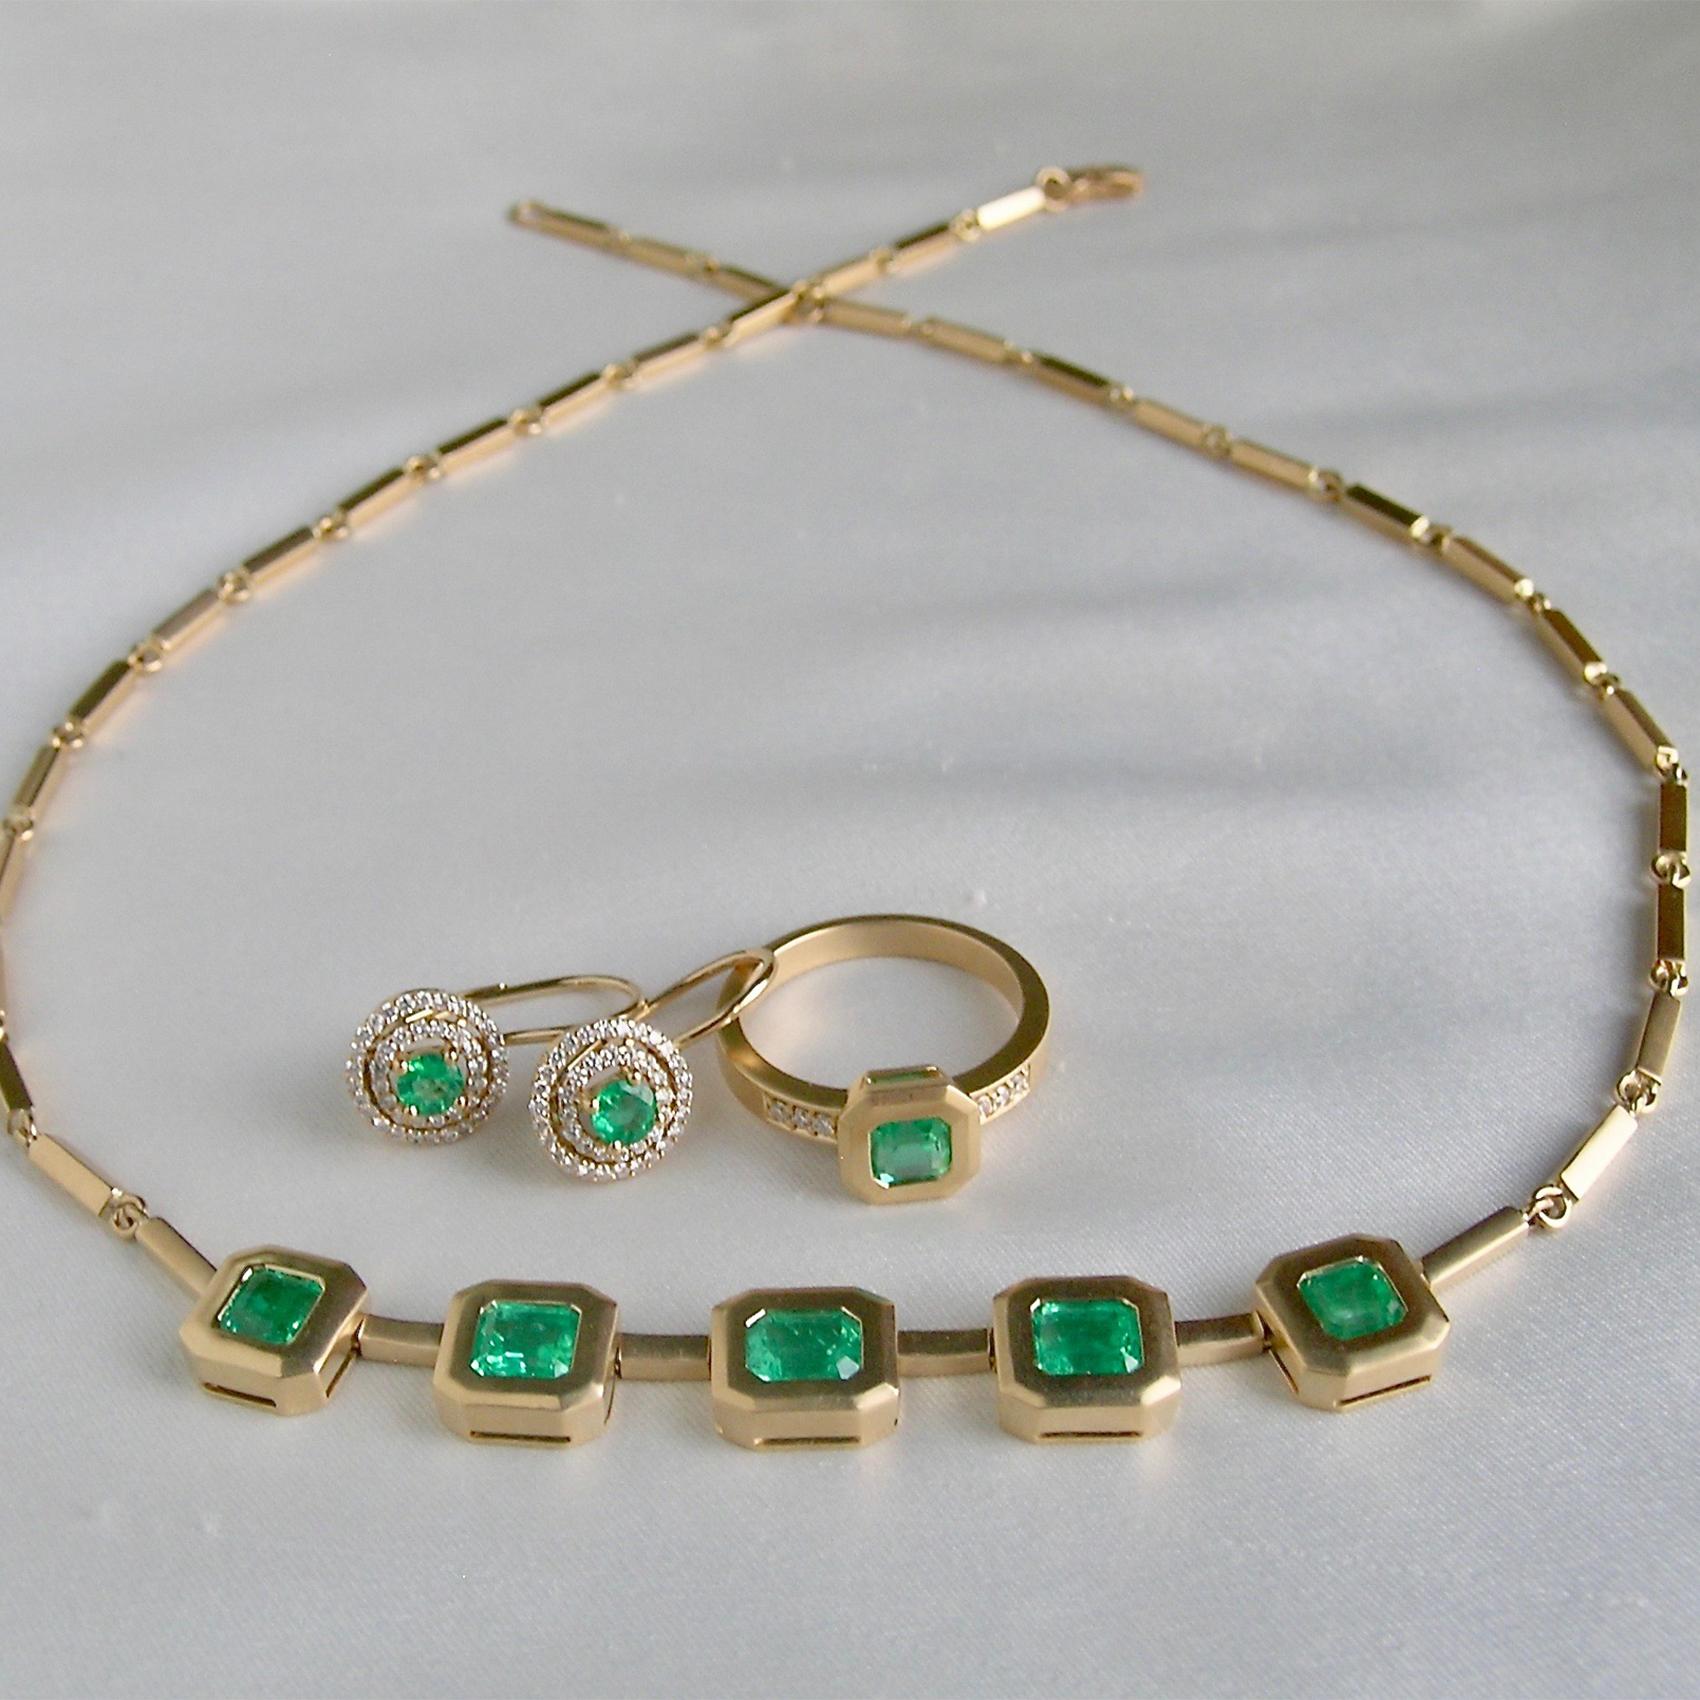 A total of 4.05cts of beautifully matched, Colombian Emeralds are used in this gorgeous necklace.  Everyday, wearable luxury at its finest.  The emeralds are of assorted shapes, creating a unique and one of a kind necklace.  The stones are of